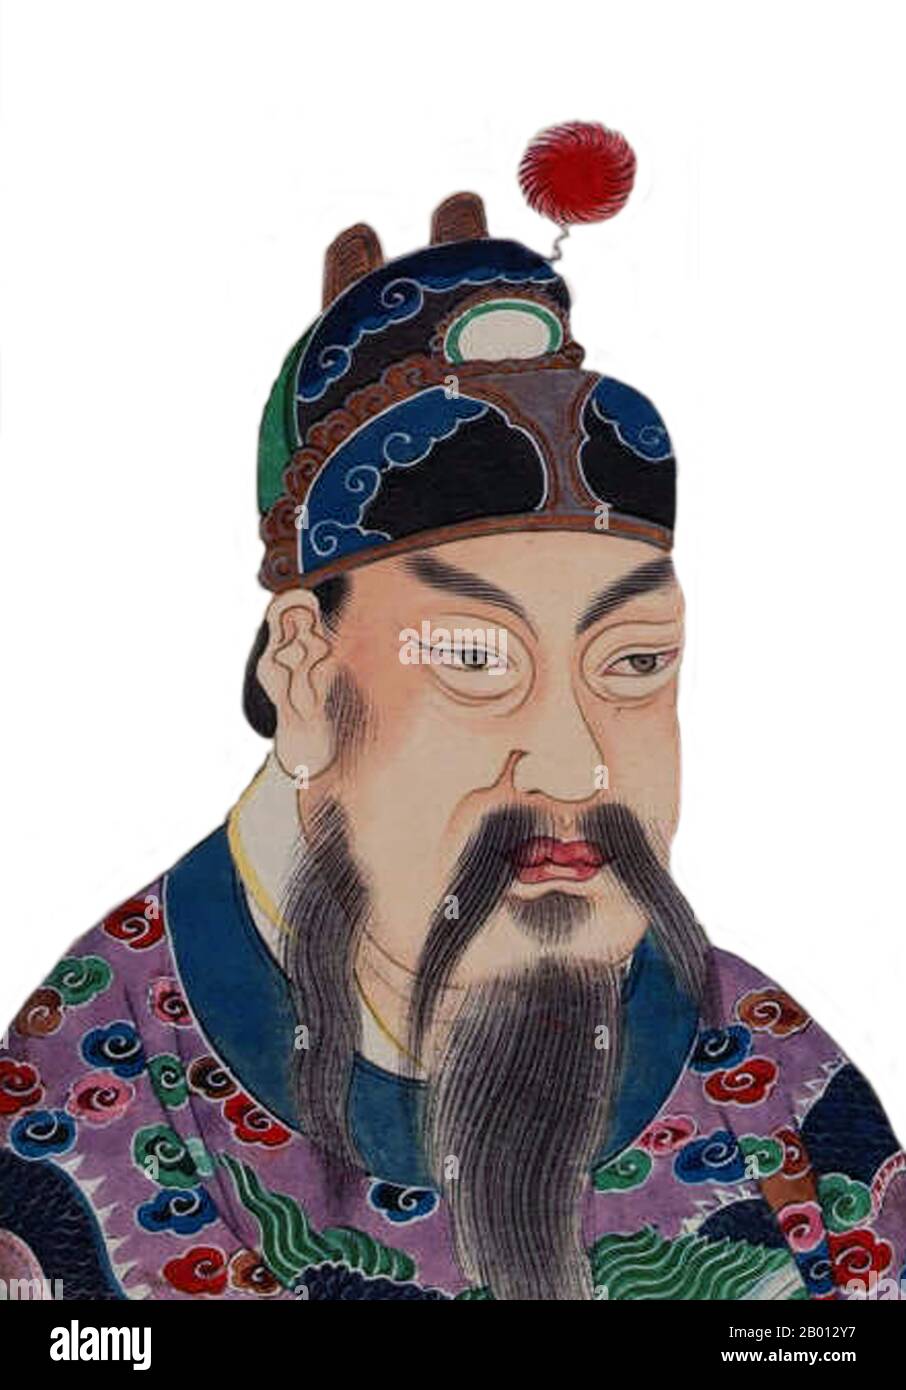 China: Emperor Yongle, 3rd ruler of the Ming Dynasty (r. 1402-1424). Hanging scroll painting, 15th-17th century.  The Yongle Emperor (1360-1424), personal name Zhu Di and temple name Chengzu, was the third emperor of the Ming Dynasty. His Chinese era name Yongle means 'Perpetual Happiness'. He became emperor by conspiring to usurp the throne from his nephew, the Jianwen Emperor. He moved the capital from Nanjing to Beijing where it was located in the following generations, and constructed the Forbidden City there. Stock Photo